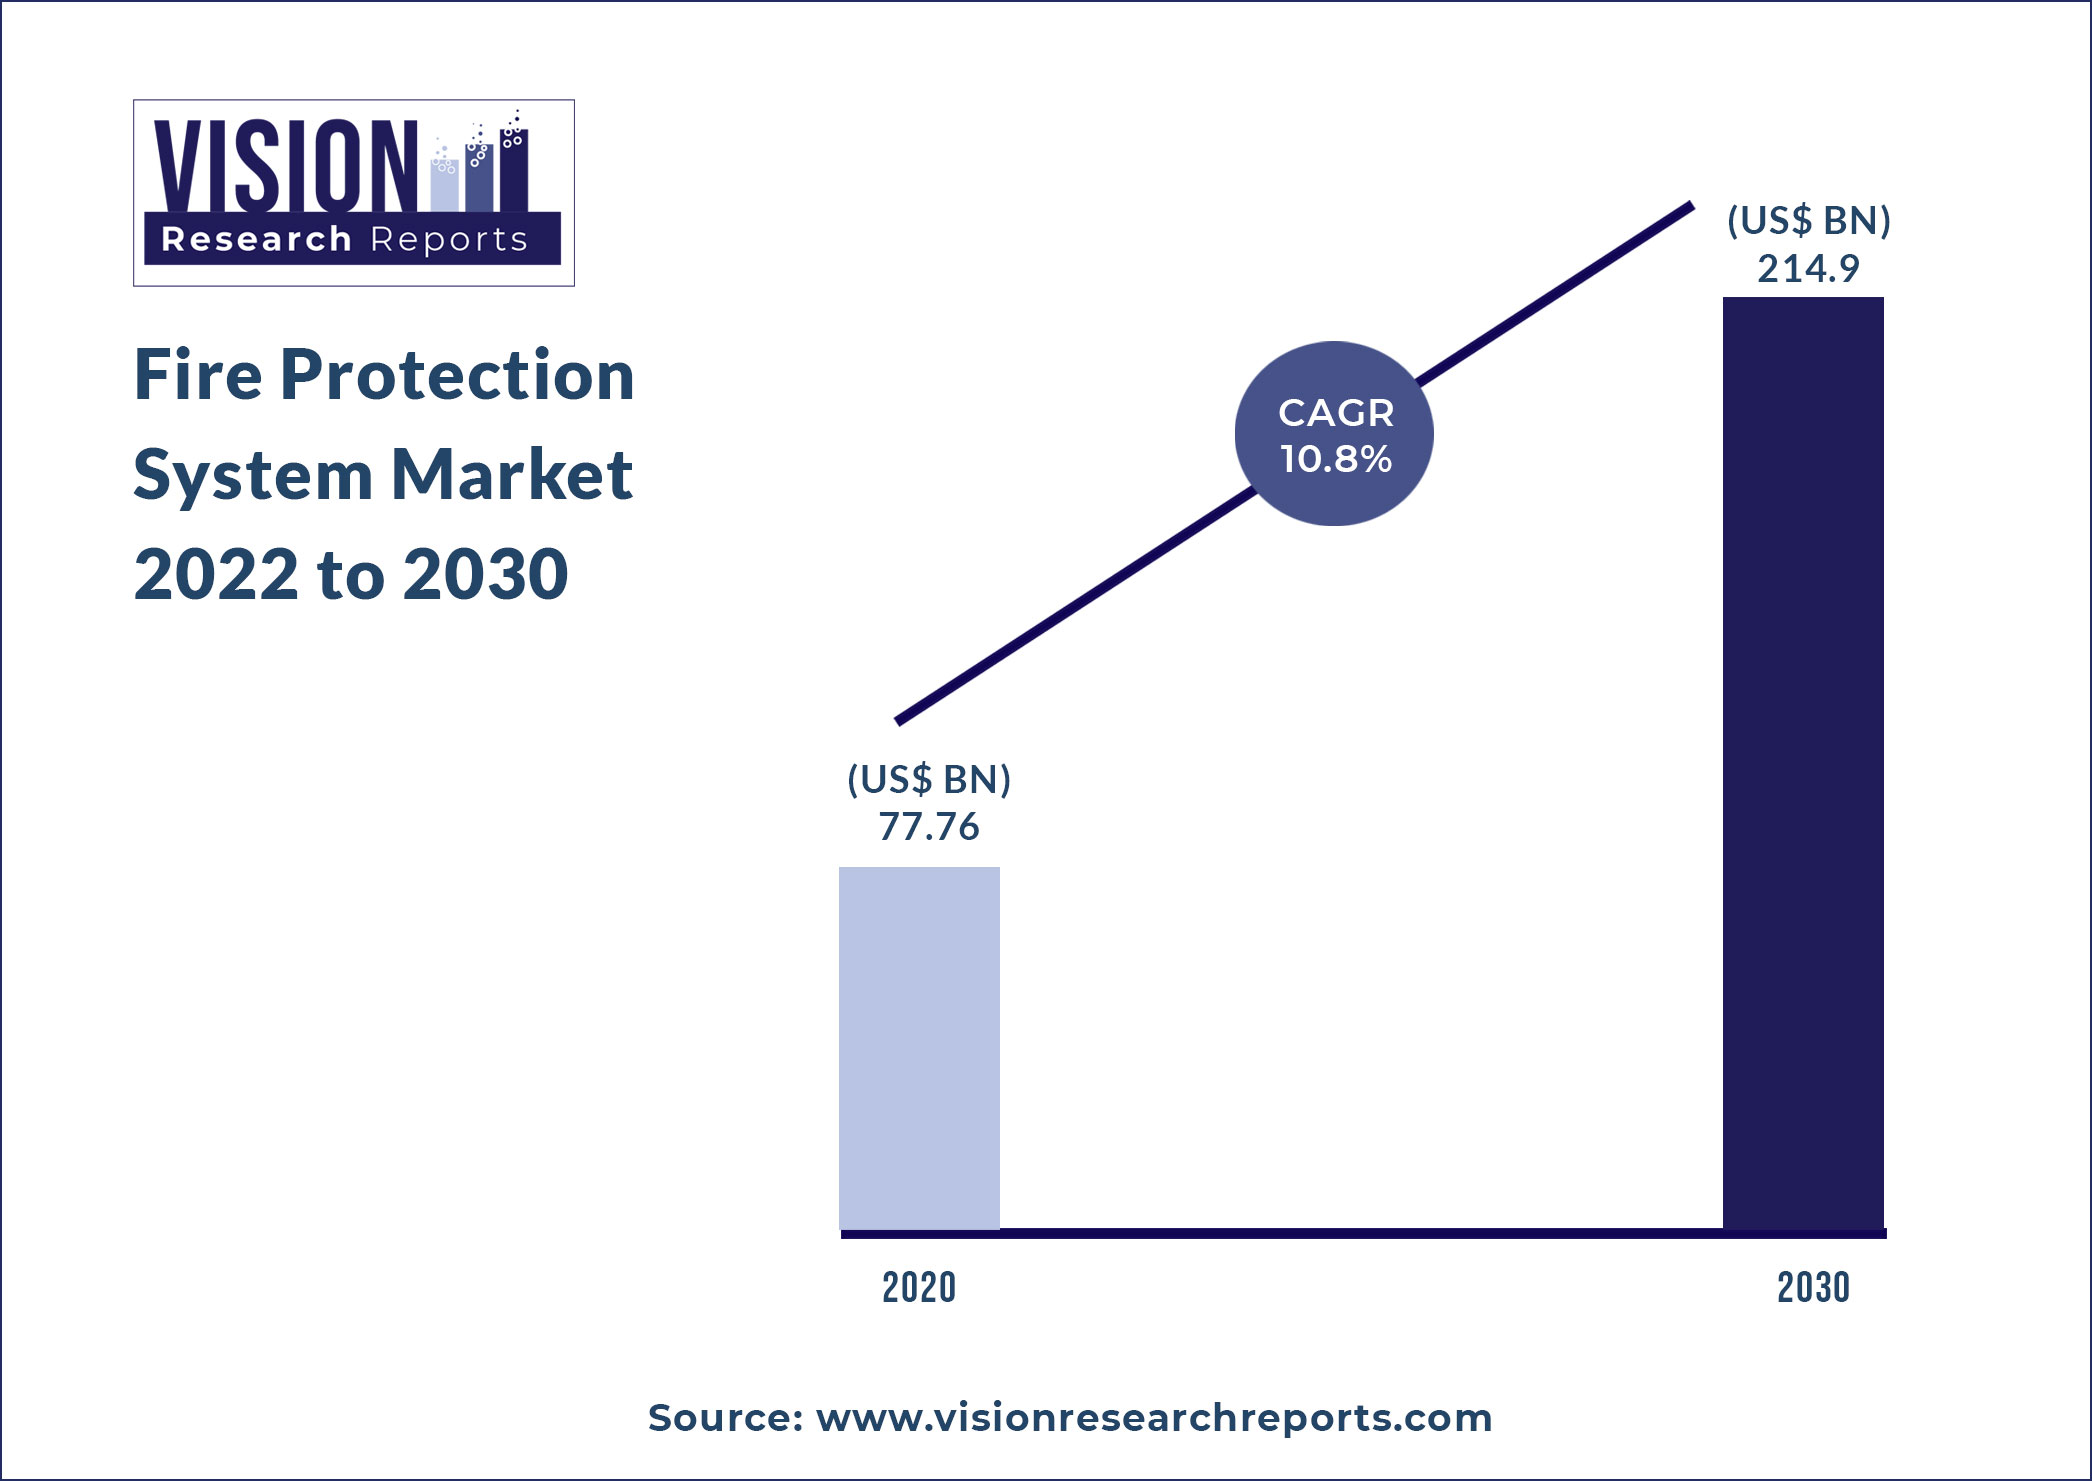 Fire Protection System Market Size 2022 to 2030